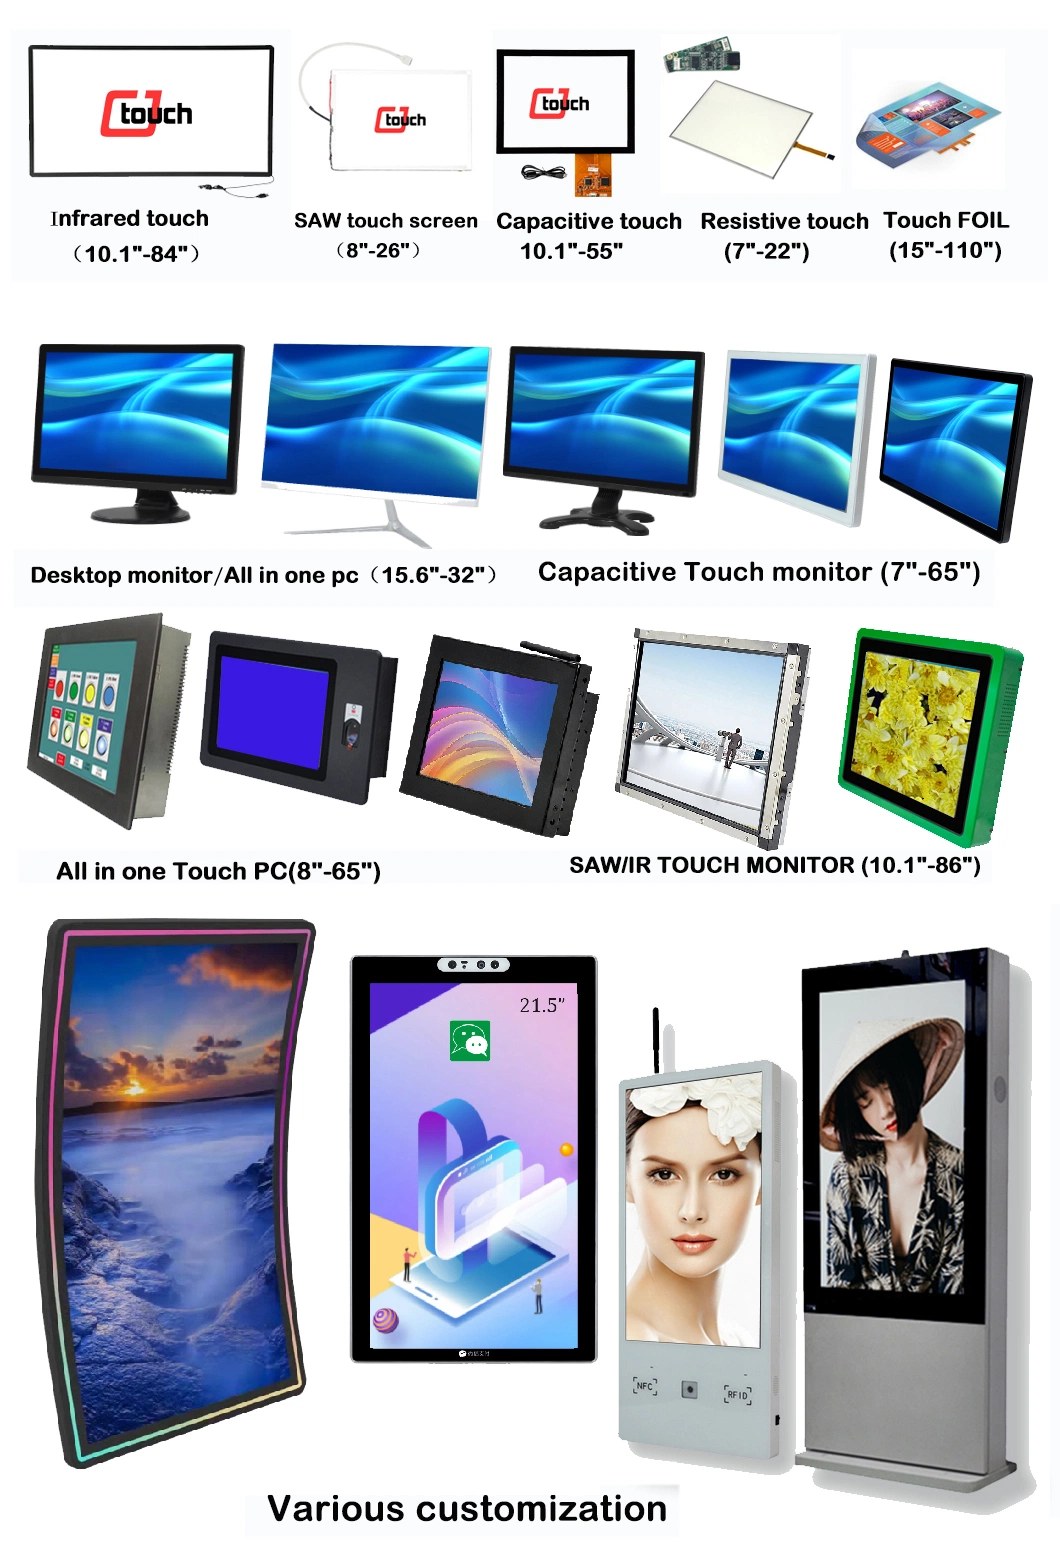 All in One PC 21.5 Inch Industrial PC Capacitive Touch Computer Smart TV LCD Panel Retial Hotel Shopee Payment Kiosk Standard Model